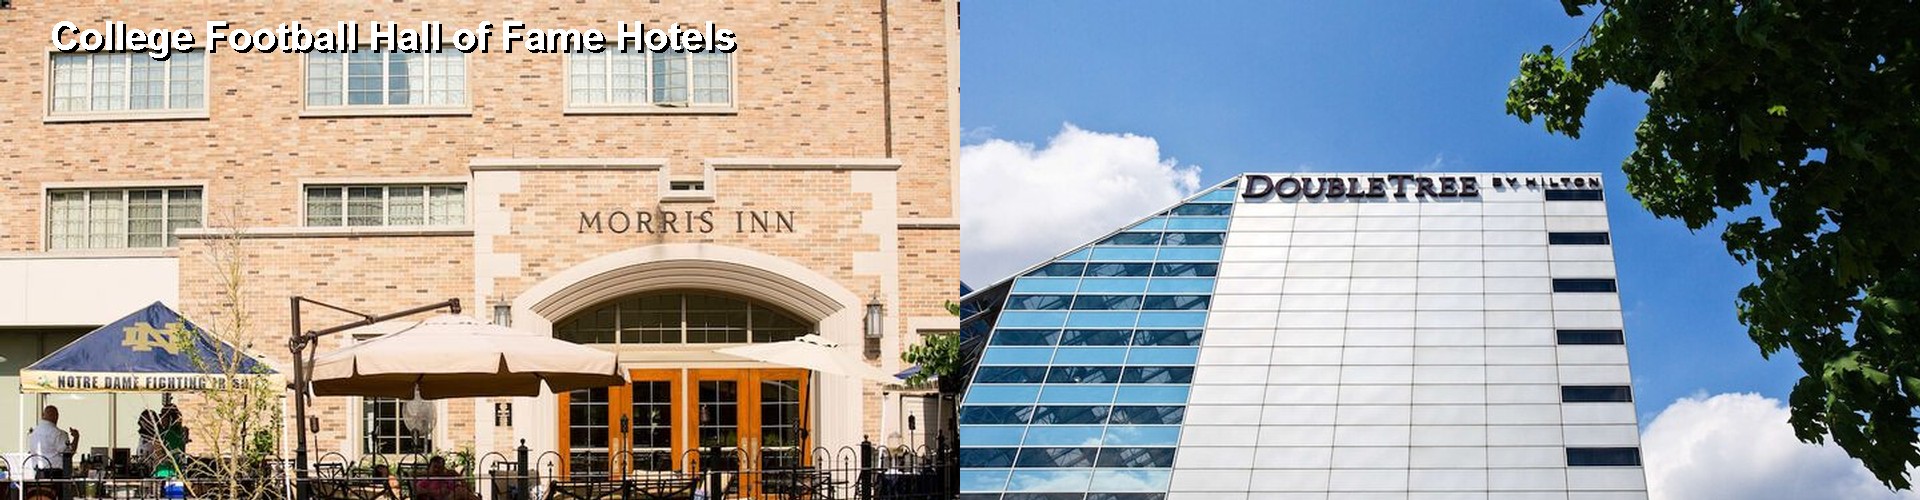 5 Best Hotels near College Football Hall of Fame